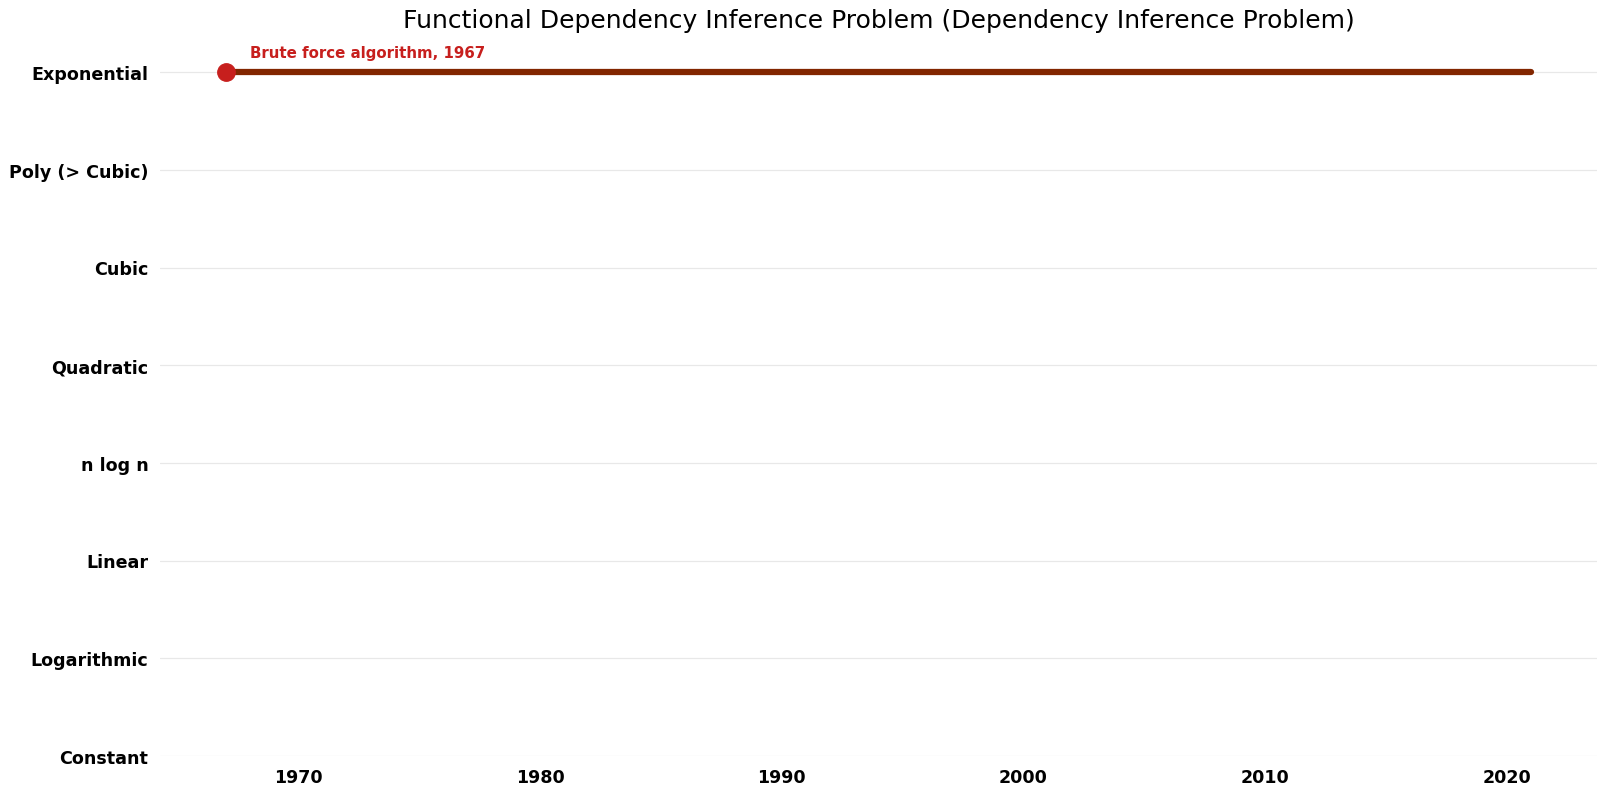 Dependency Inference Problem - Functional Dependency Inference Problem - Space.png